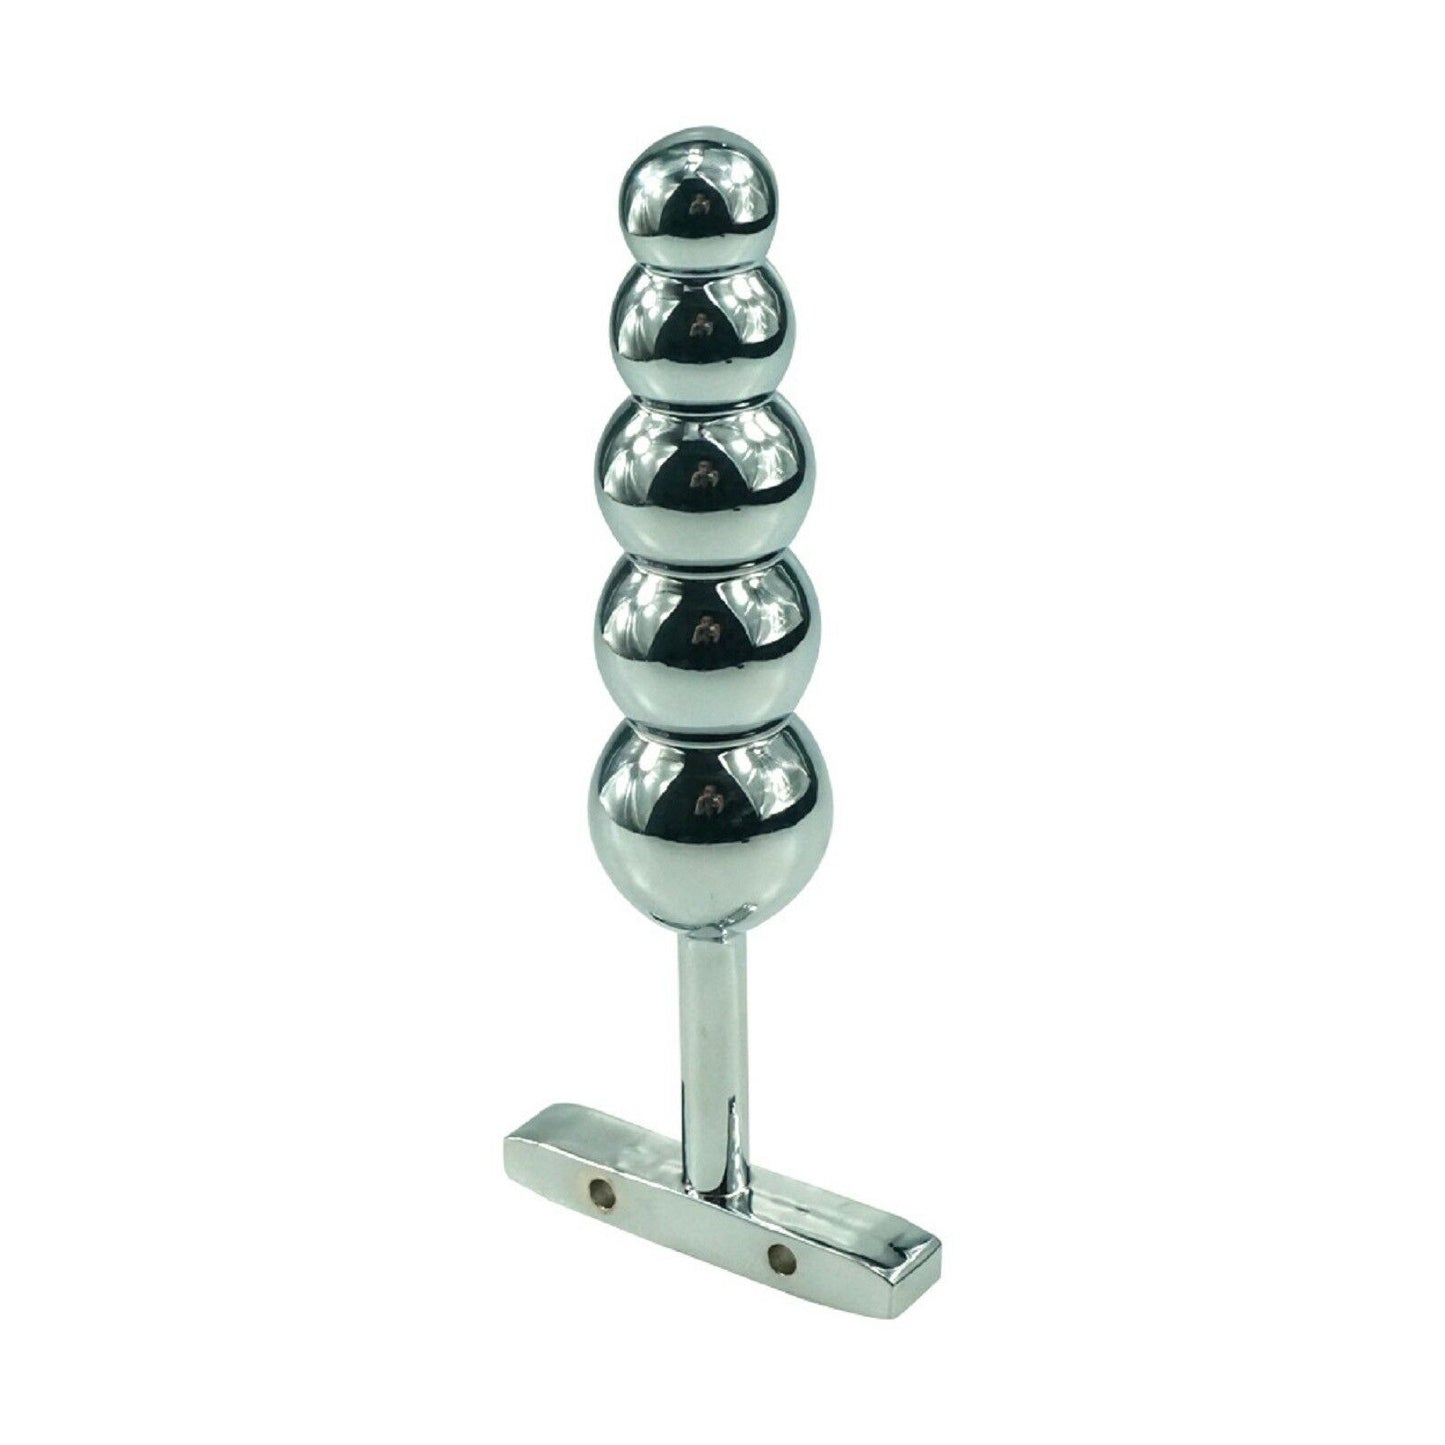 BDSM Stainless Steel Anal Plug Large Anal Beads Butt Plug Metal Adult Sex Toy